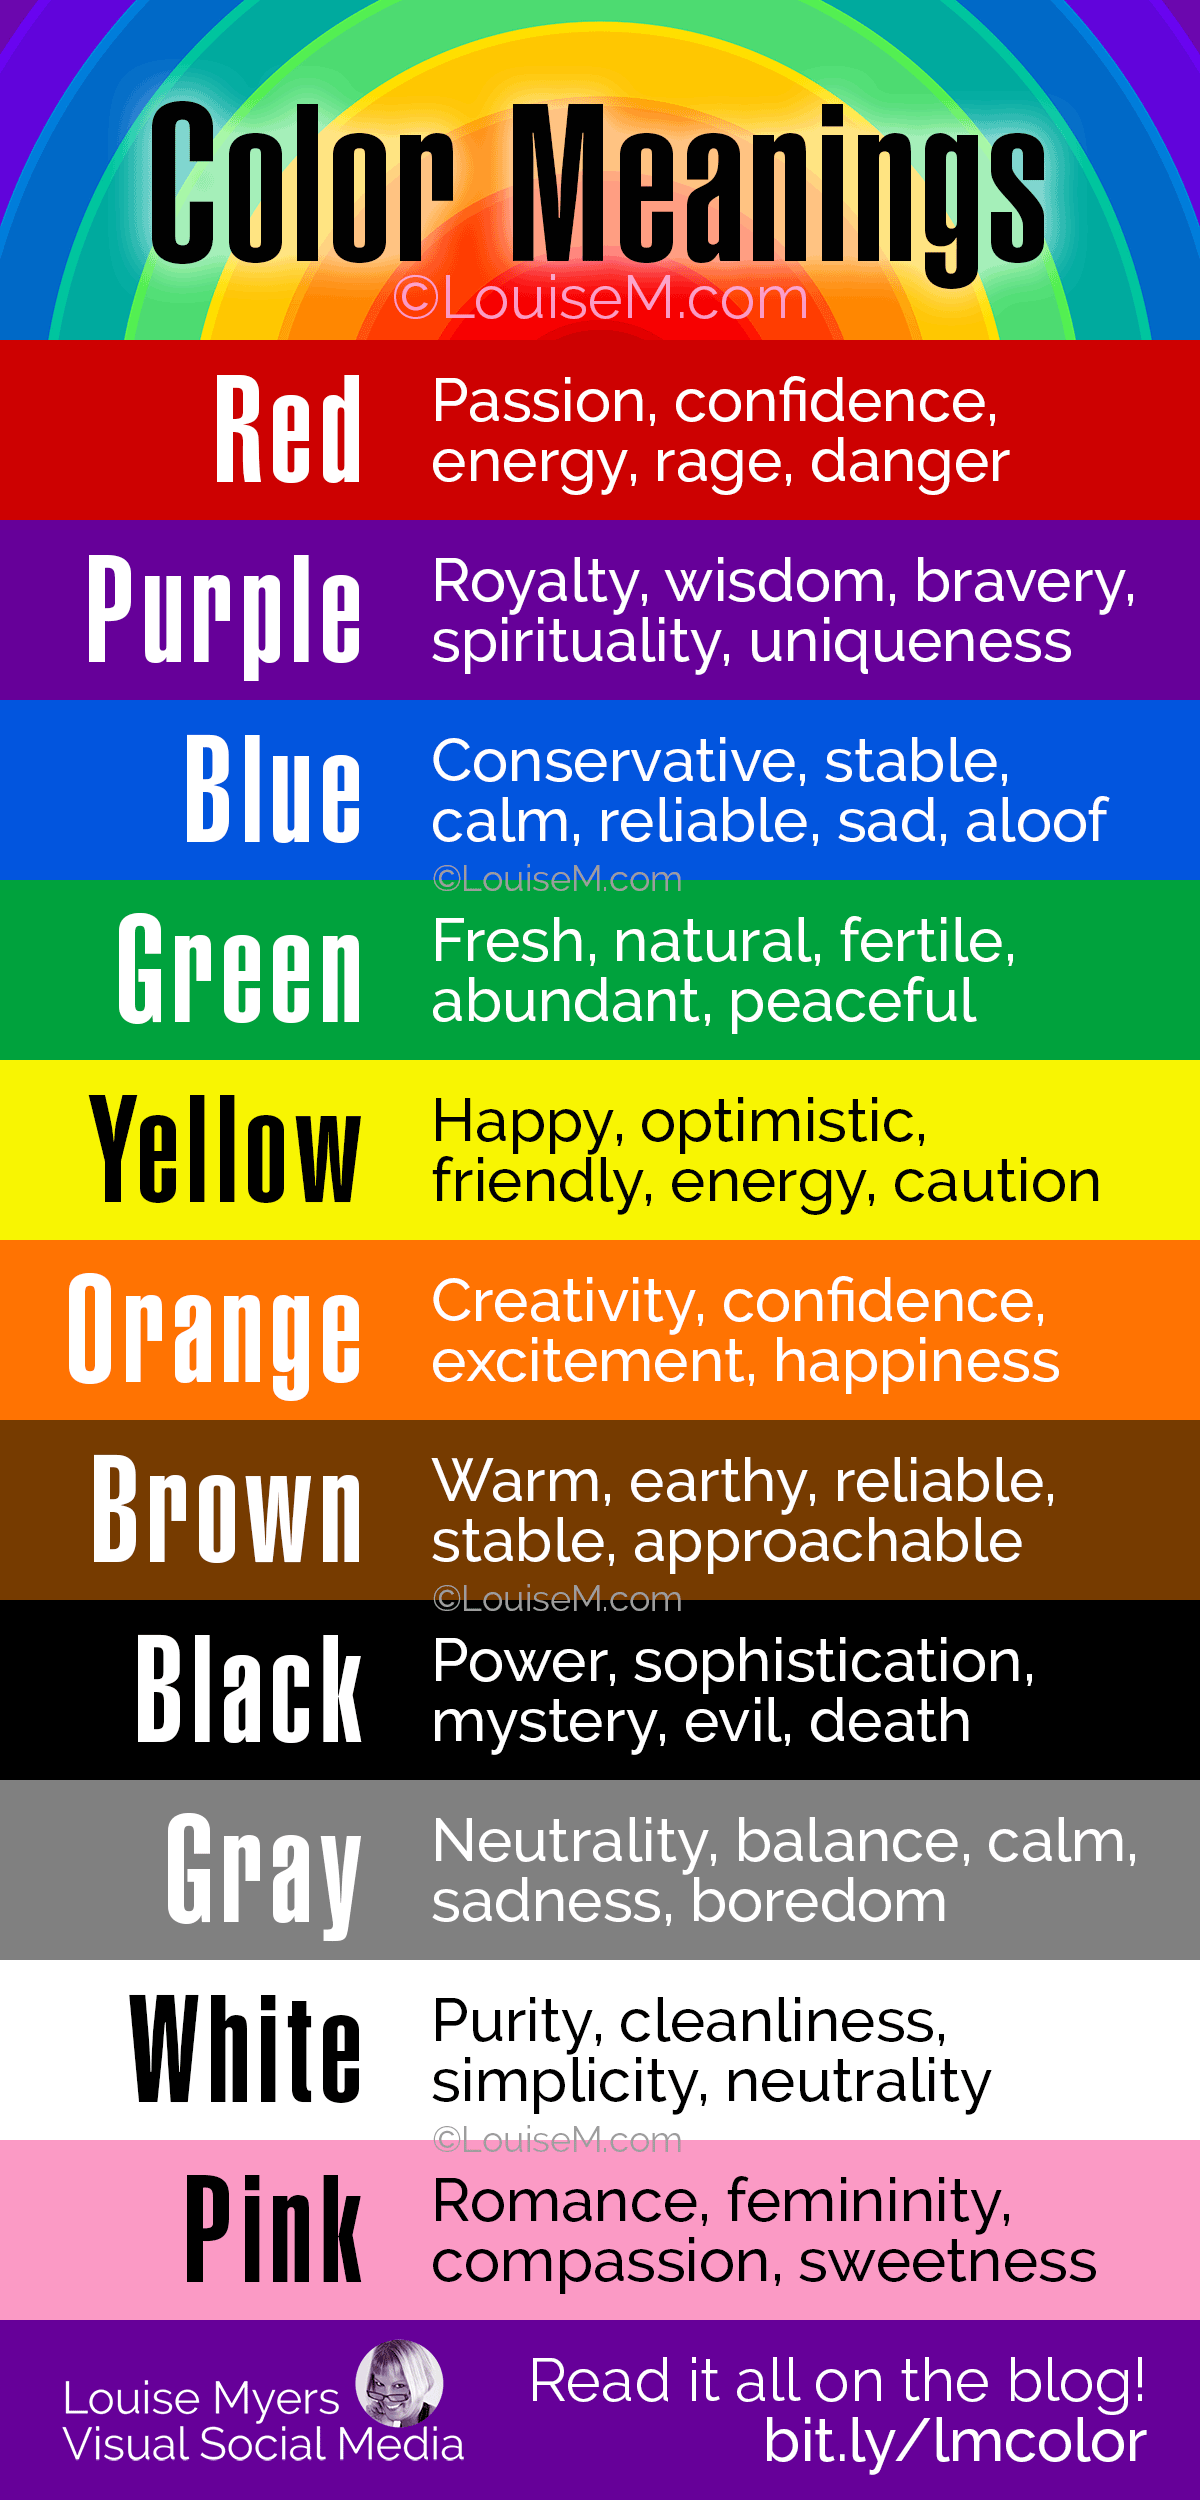 rainbow of colors with their names and meanings on an infographic.